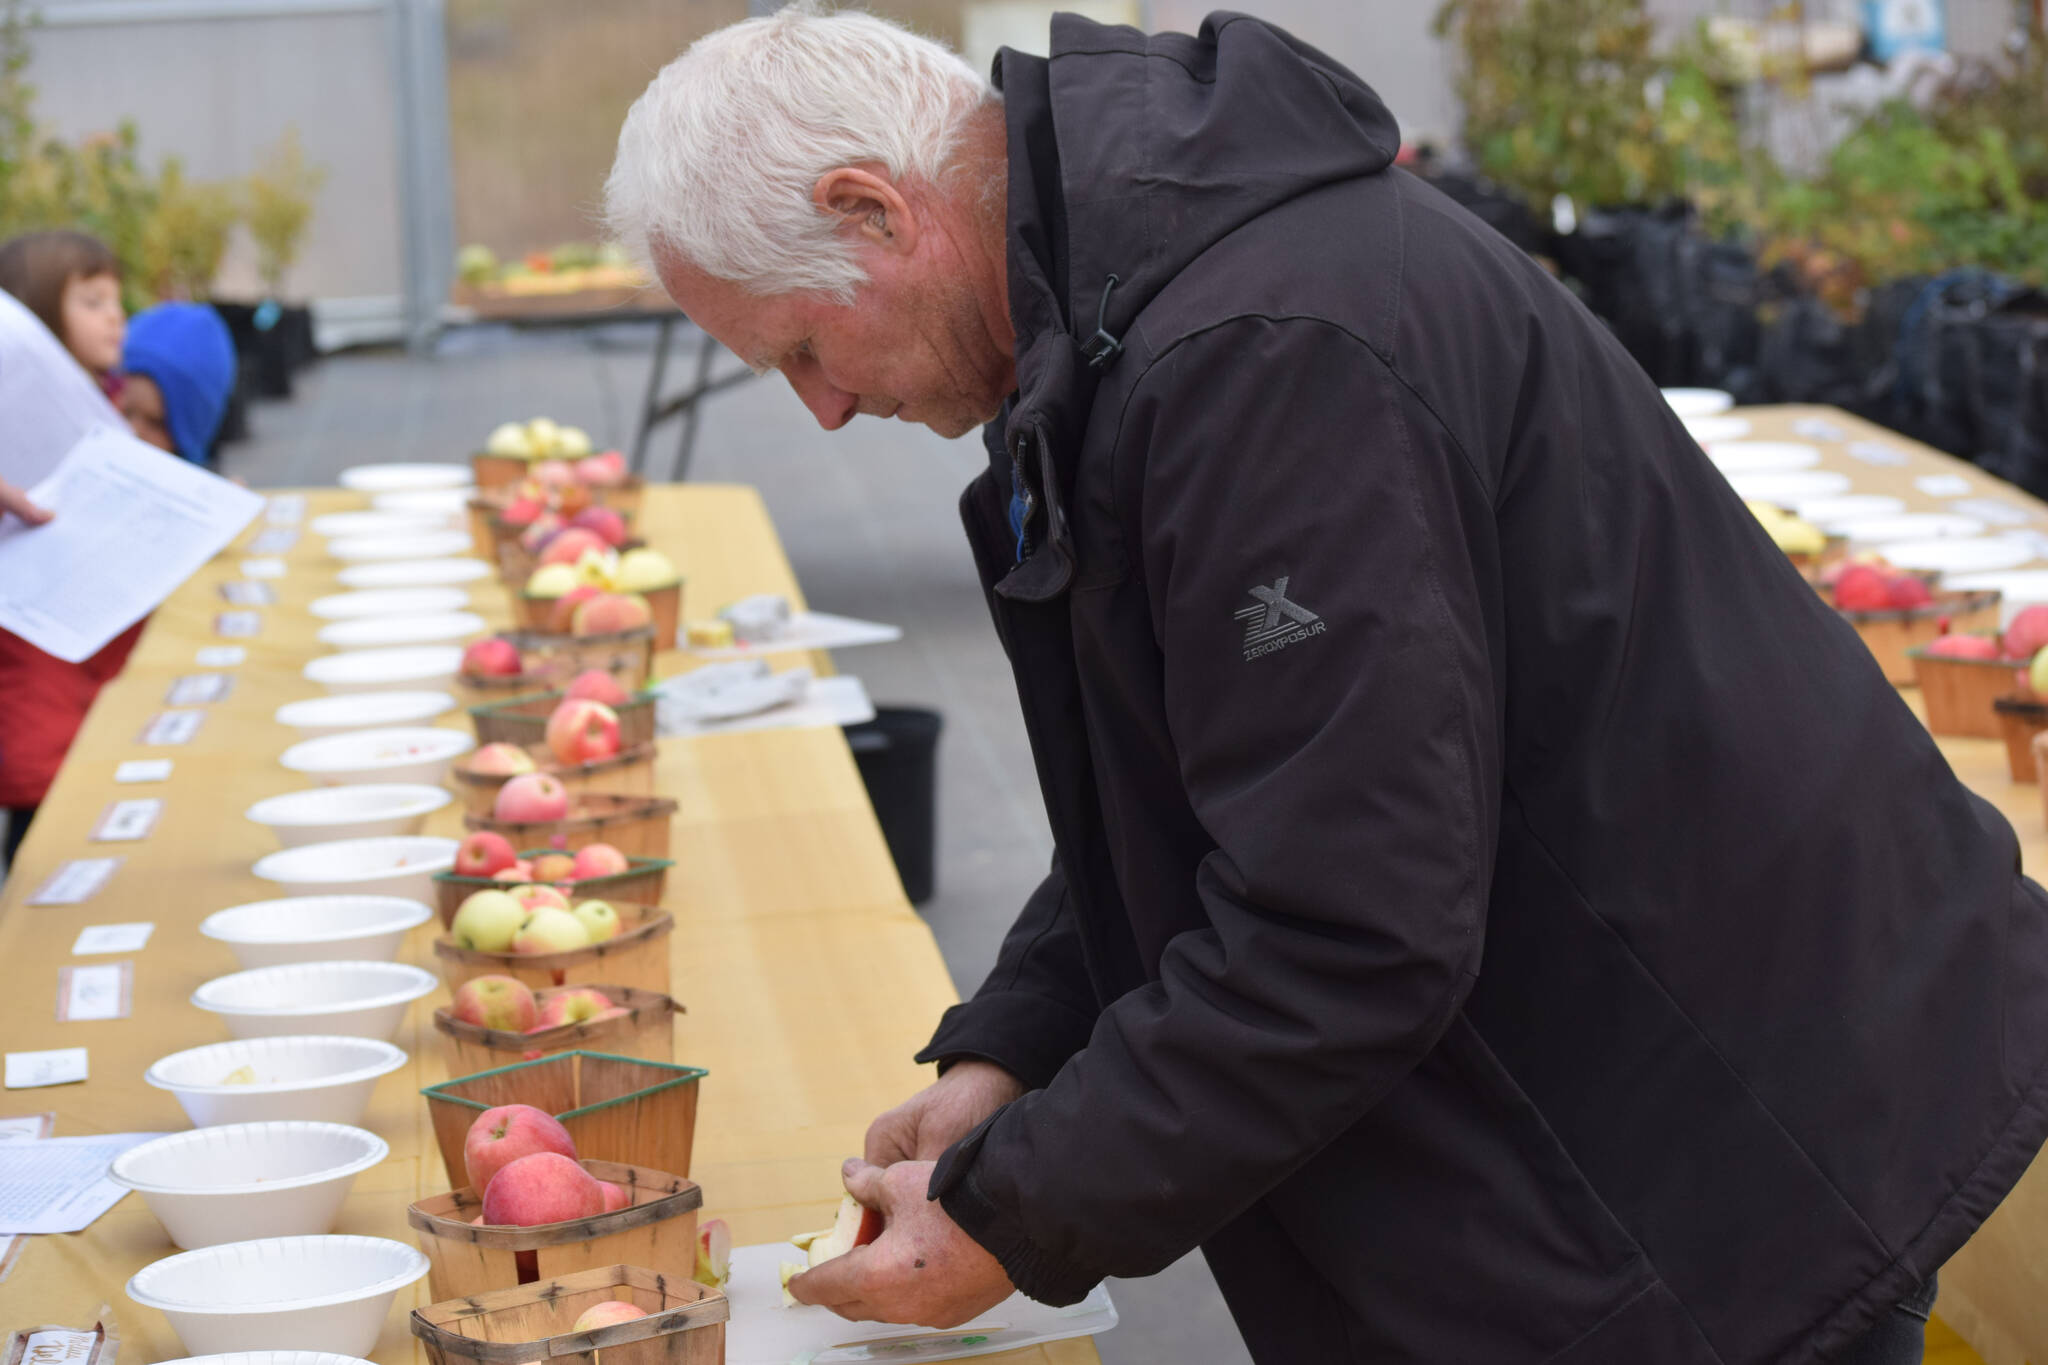 Mike O’Brien works the apple tasting at O’Brien Garden and Trees in Nikiski, Alaska on Saturday, Sept. 25, 2021. (Camille Botello/Peninsula Clarion)